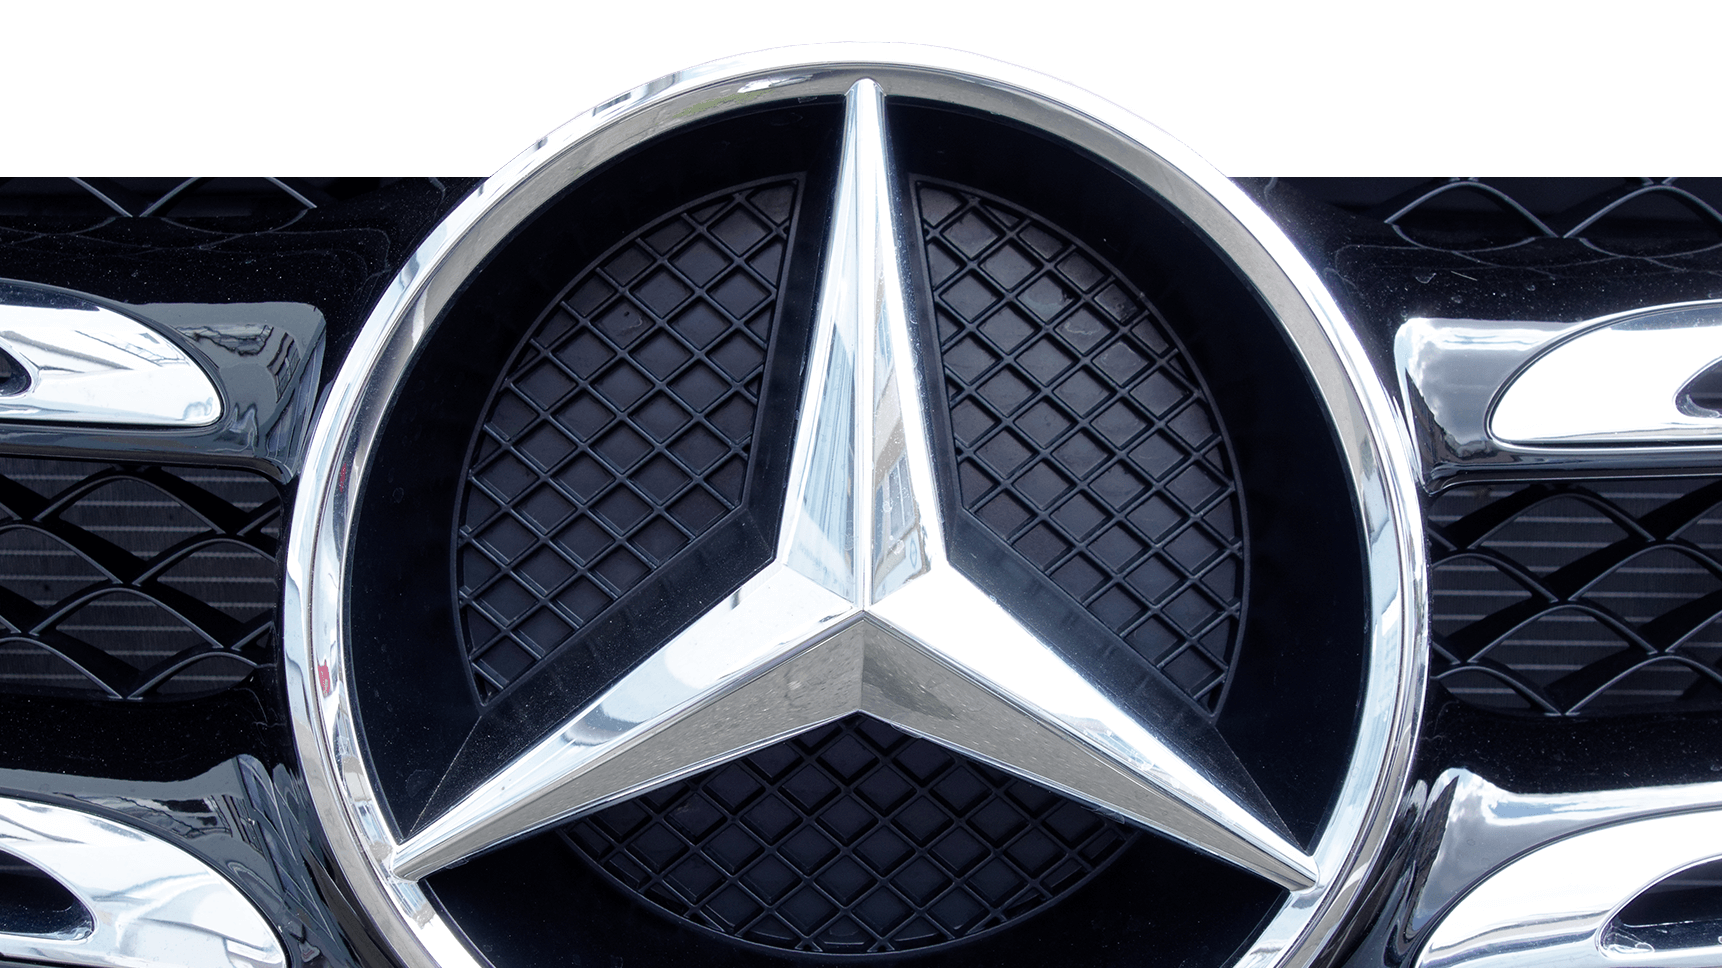 Daimler, owner of Mercedes Benz, is behind the new crypto wallet partnership